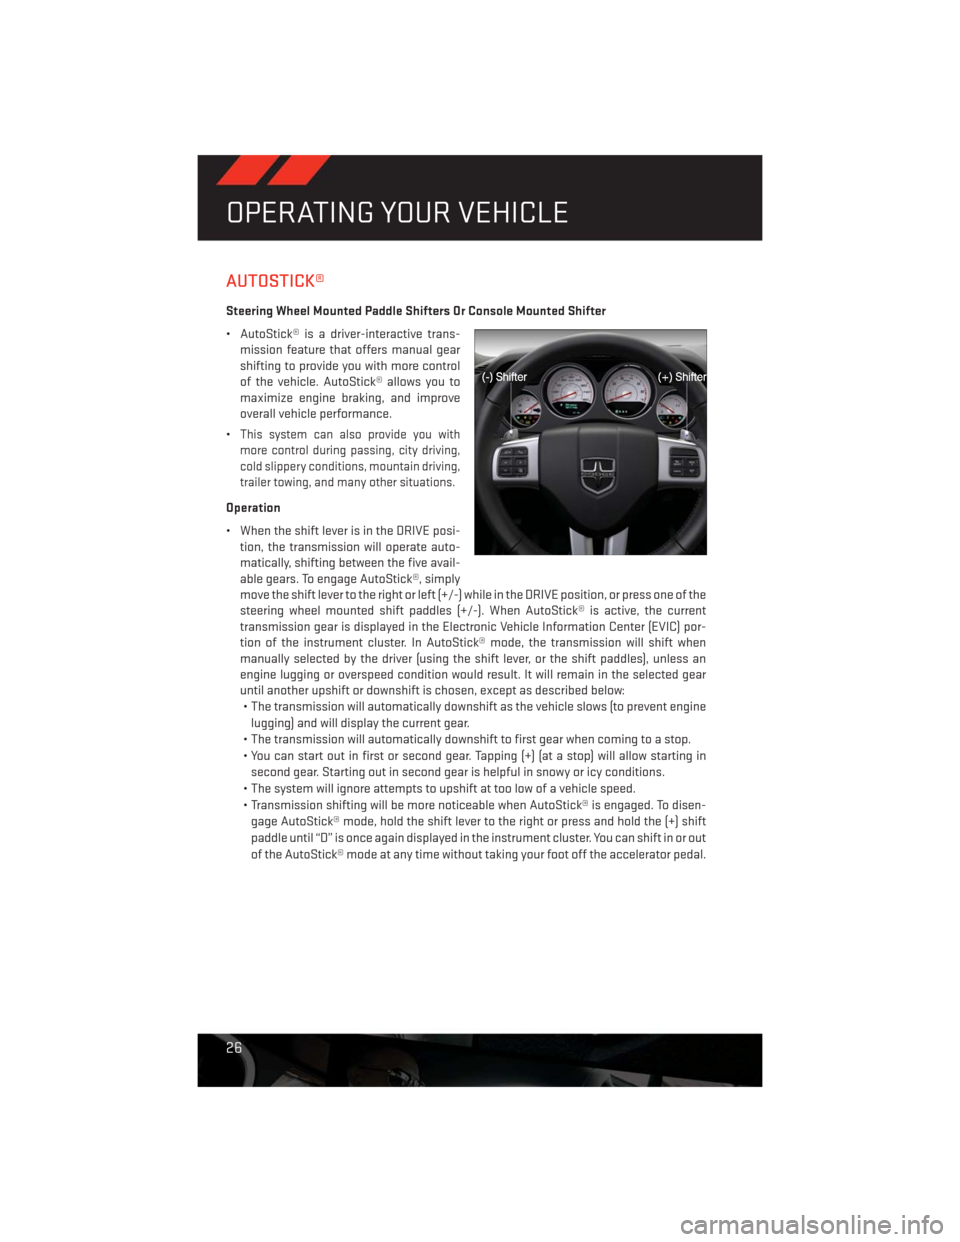 DODGE CHALLENGER 2013 3.G User Guide AUTOSTICK®
Steering Wheel Mounted Paddle Shifters Or Console Mounted Shifter
• AutoStick® is a driver-interactive trans-
mission feature that offers manual gear
shifting to provide you with more c